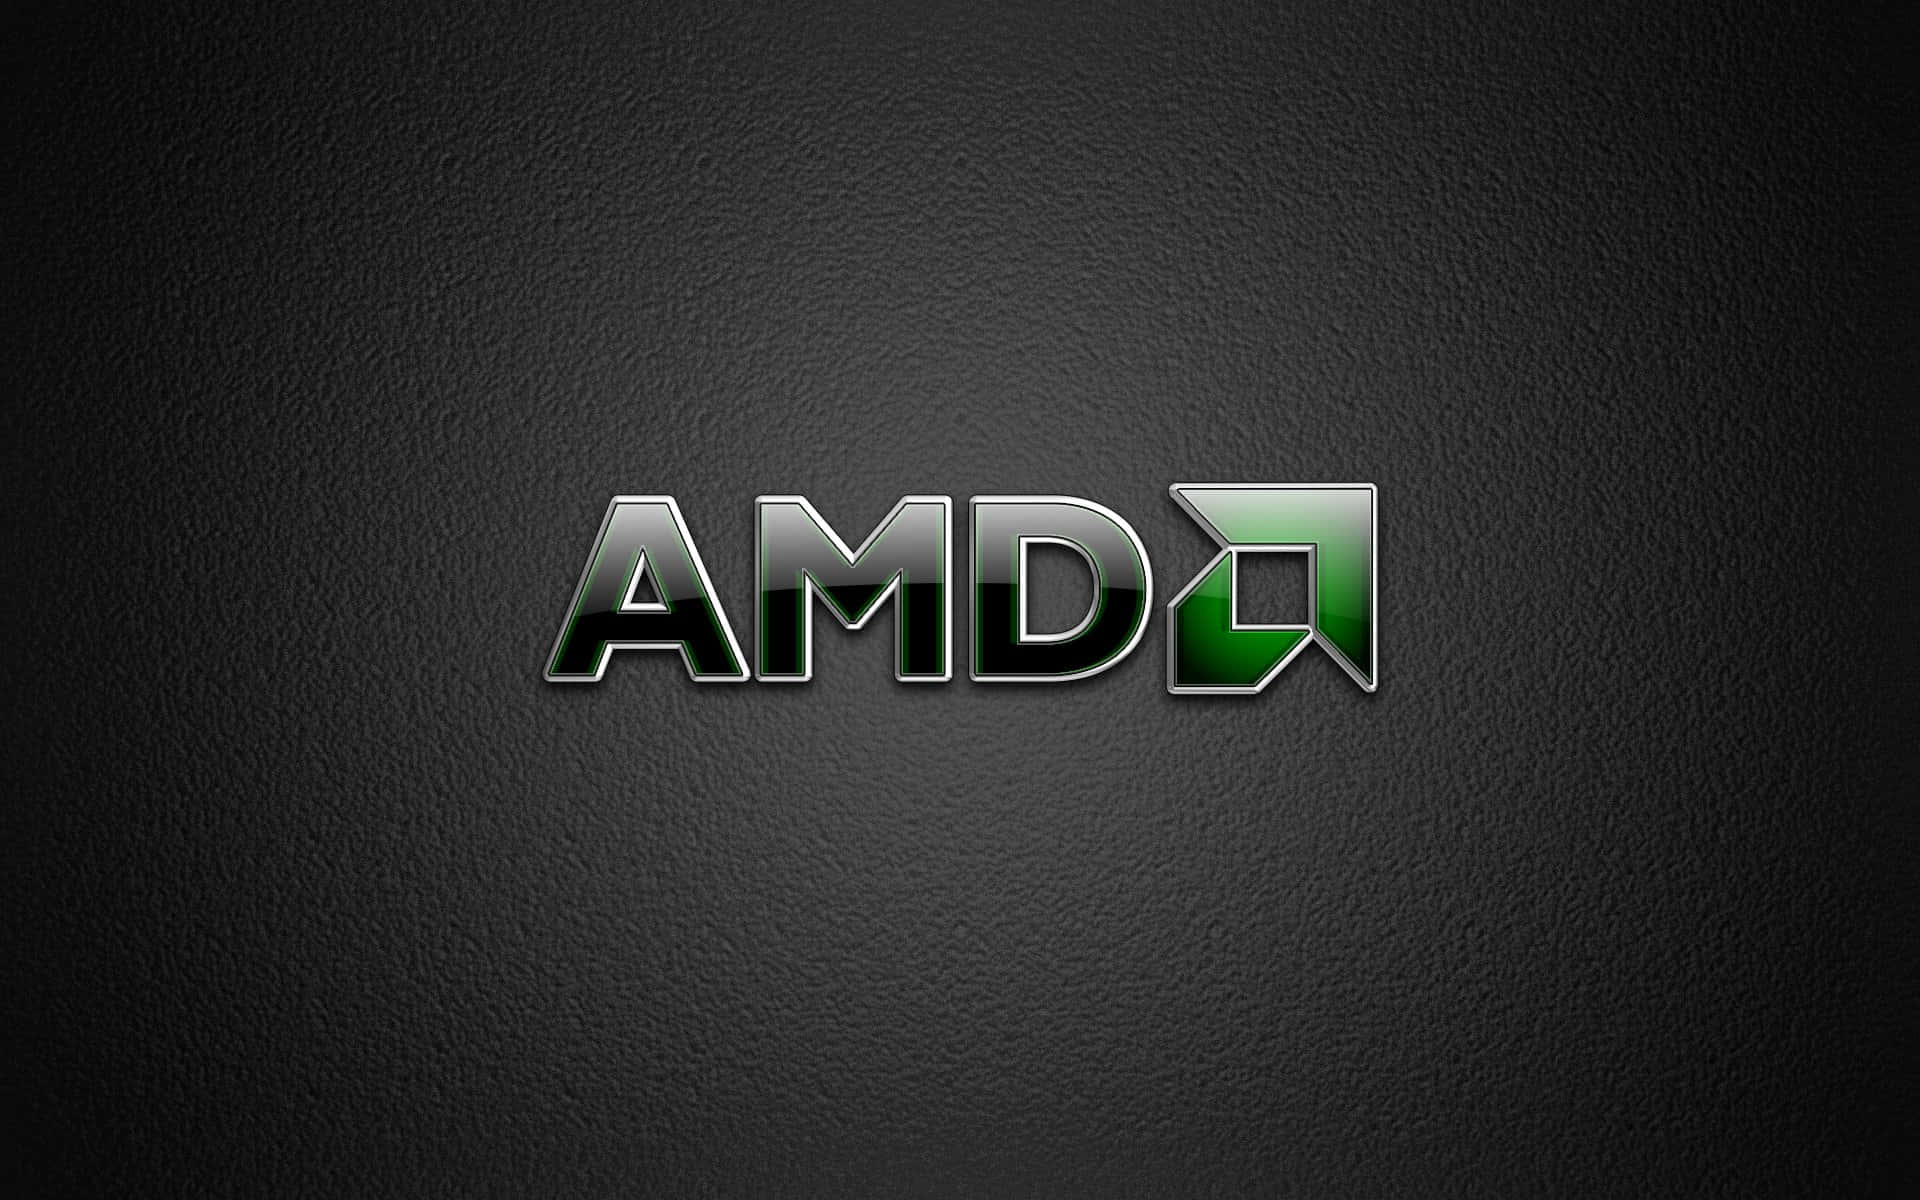 AMD tech powering the system